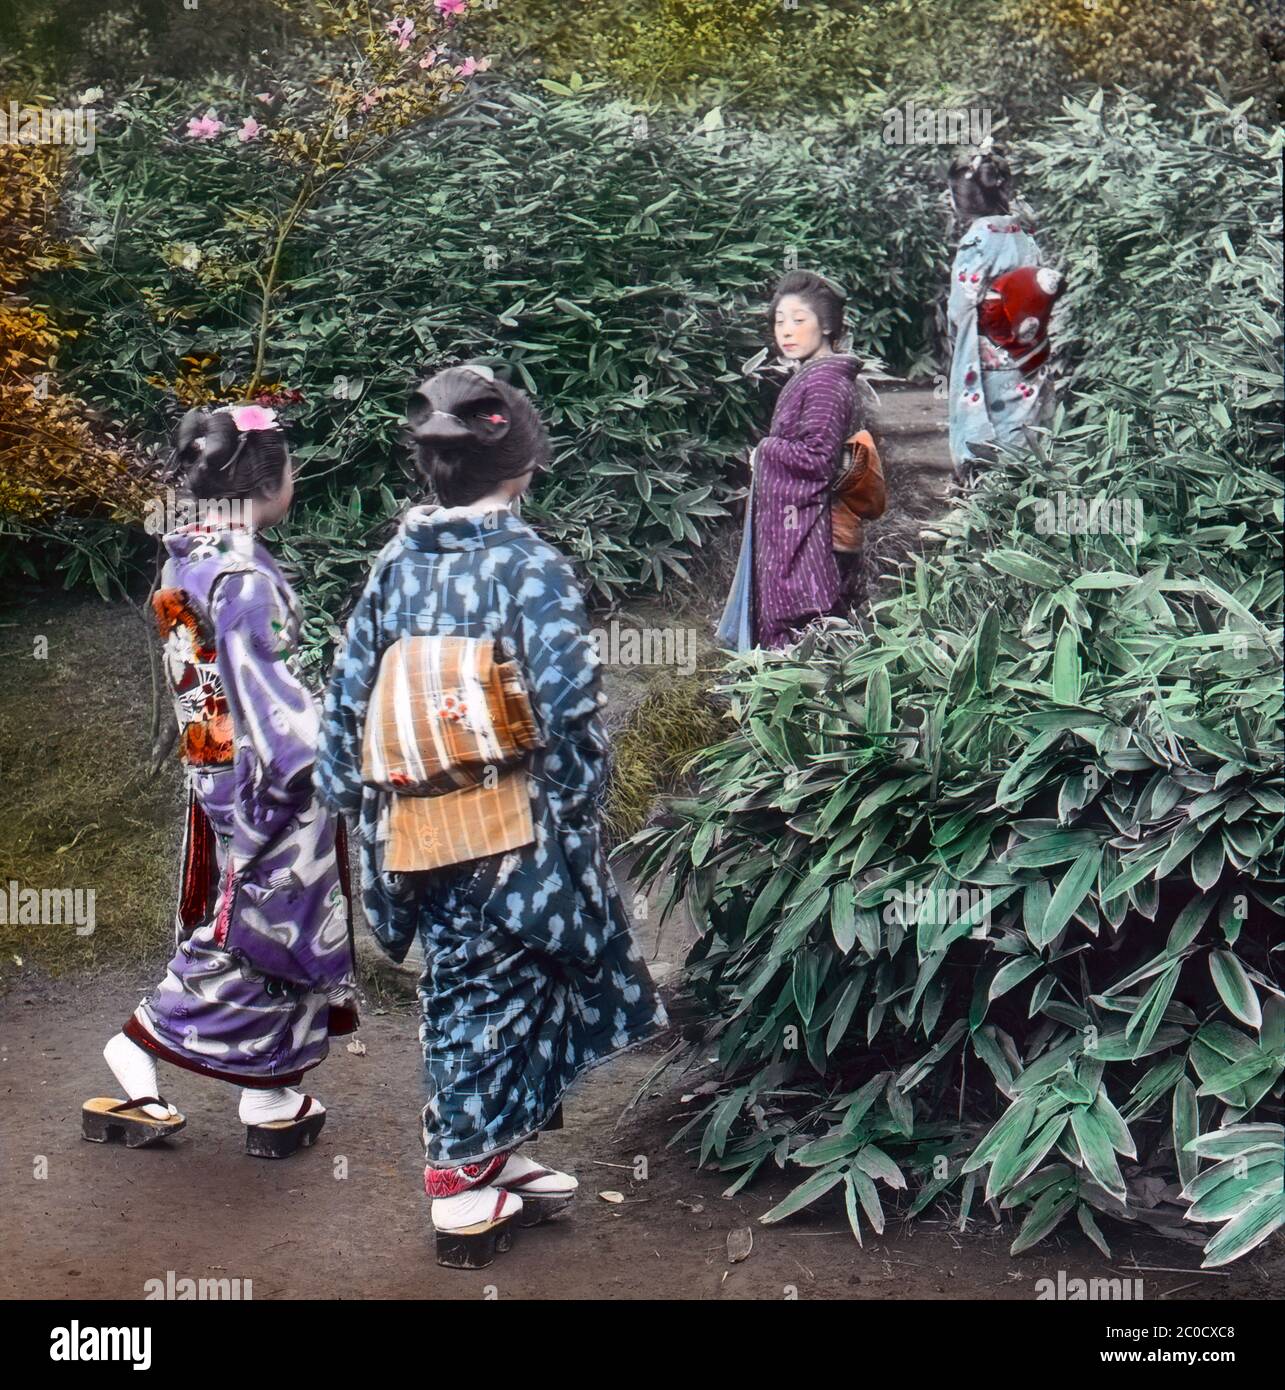 [ 1900s Japan - Women Admiring Bamboo ] — Four  young women admire yellow-edged bamboo at a garden in Yokohama, Kanagawa Prefecture.  The private garden was on the grounds of a villa in Nogeyama owned by a rich merchant family.  Twice a year, the garden was opened to the public and people would line up to admire the plum blossom in spring and the chrysanthemums in autumn.  20th century vintage glass slide. Stock Photo